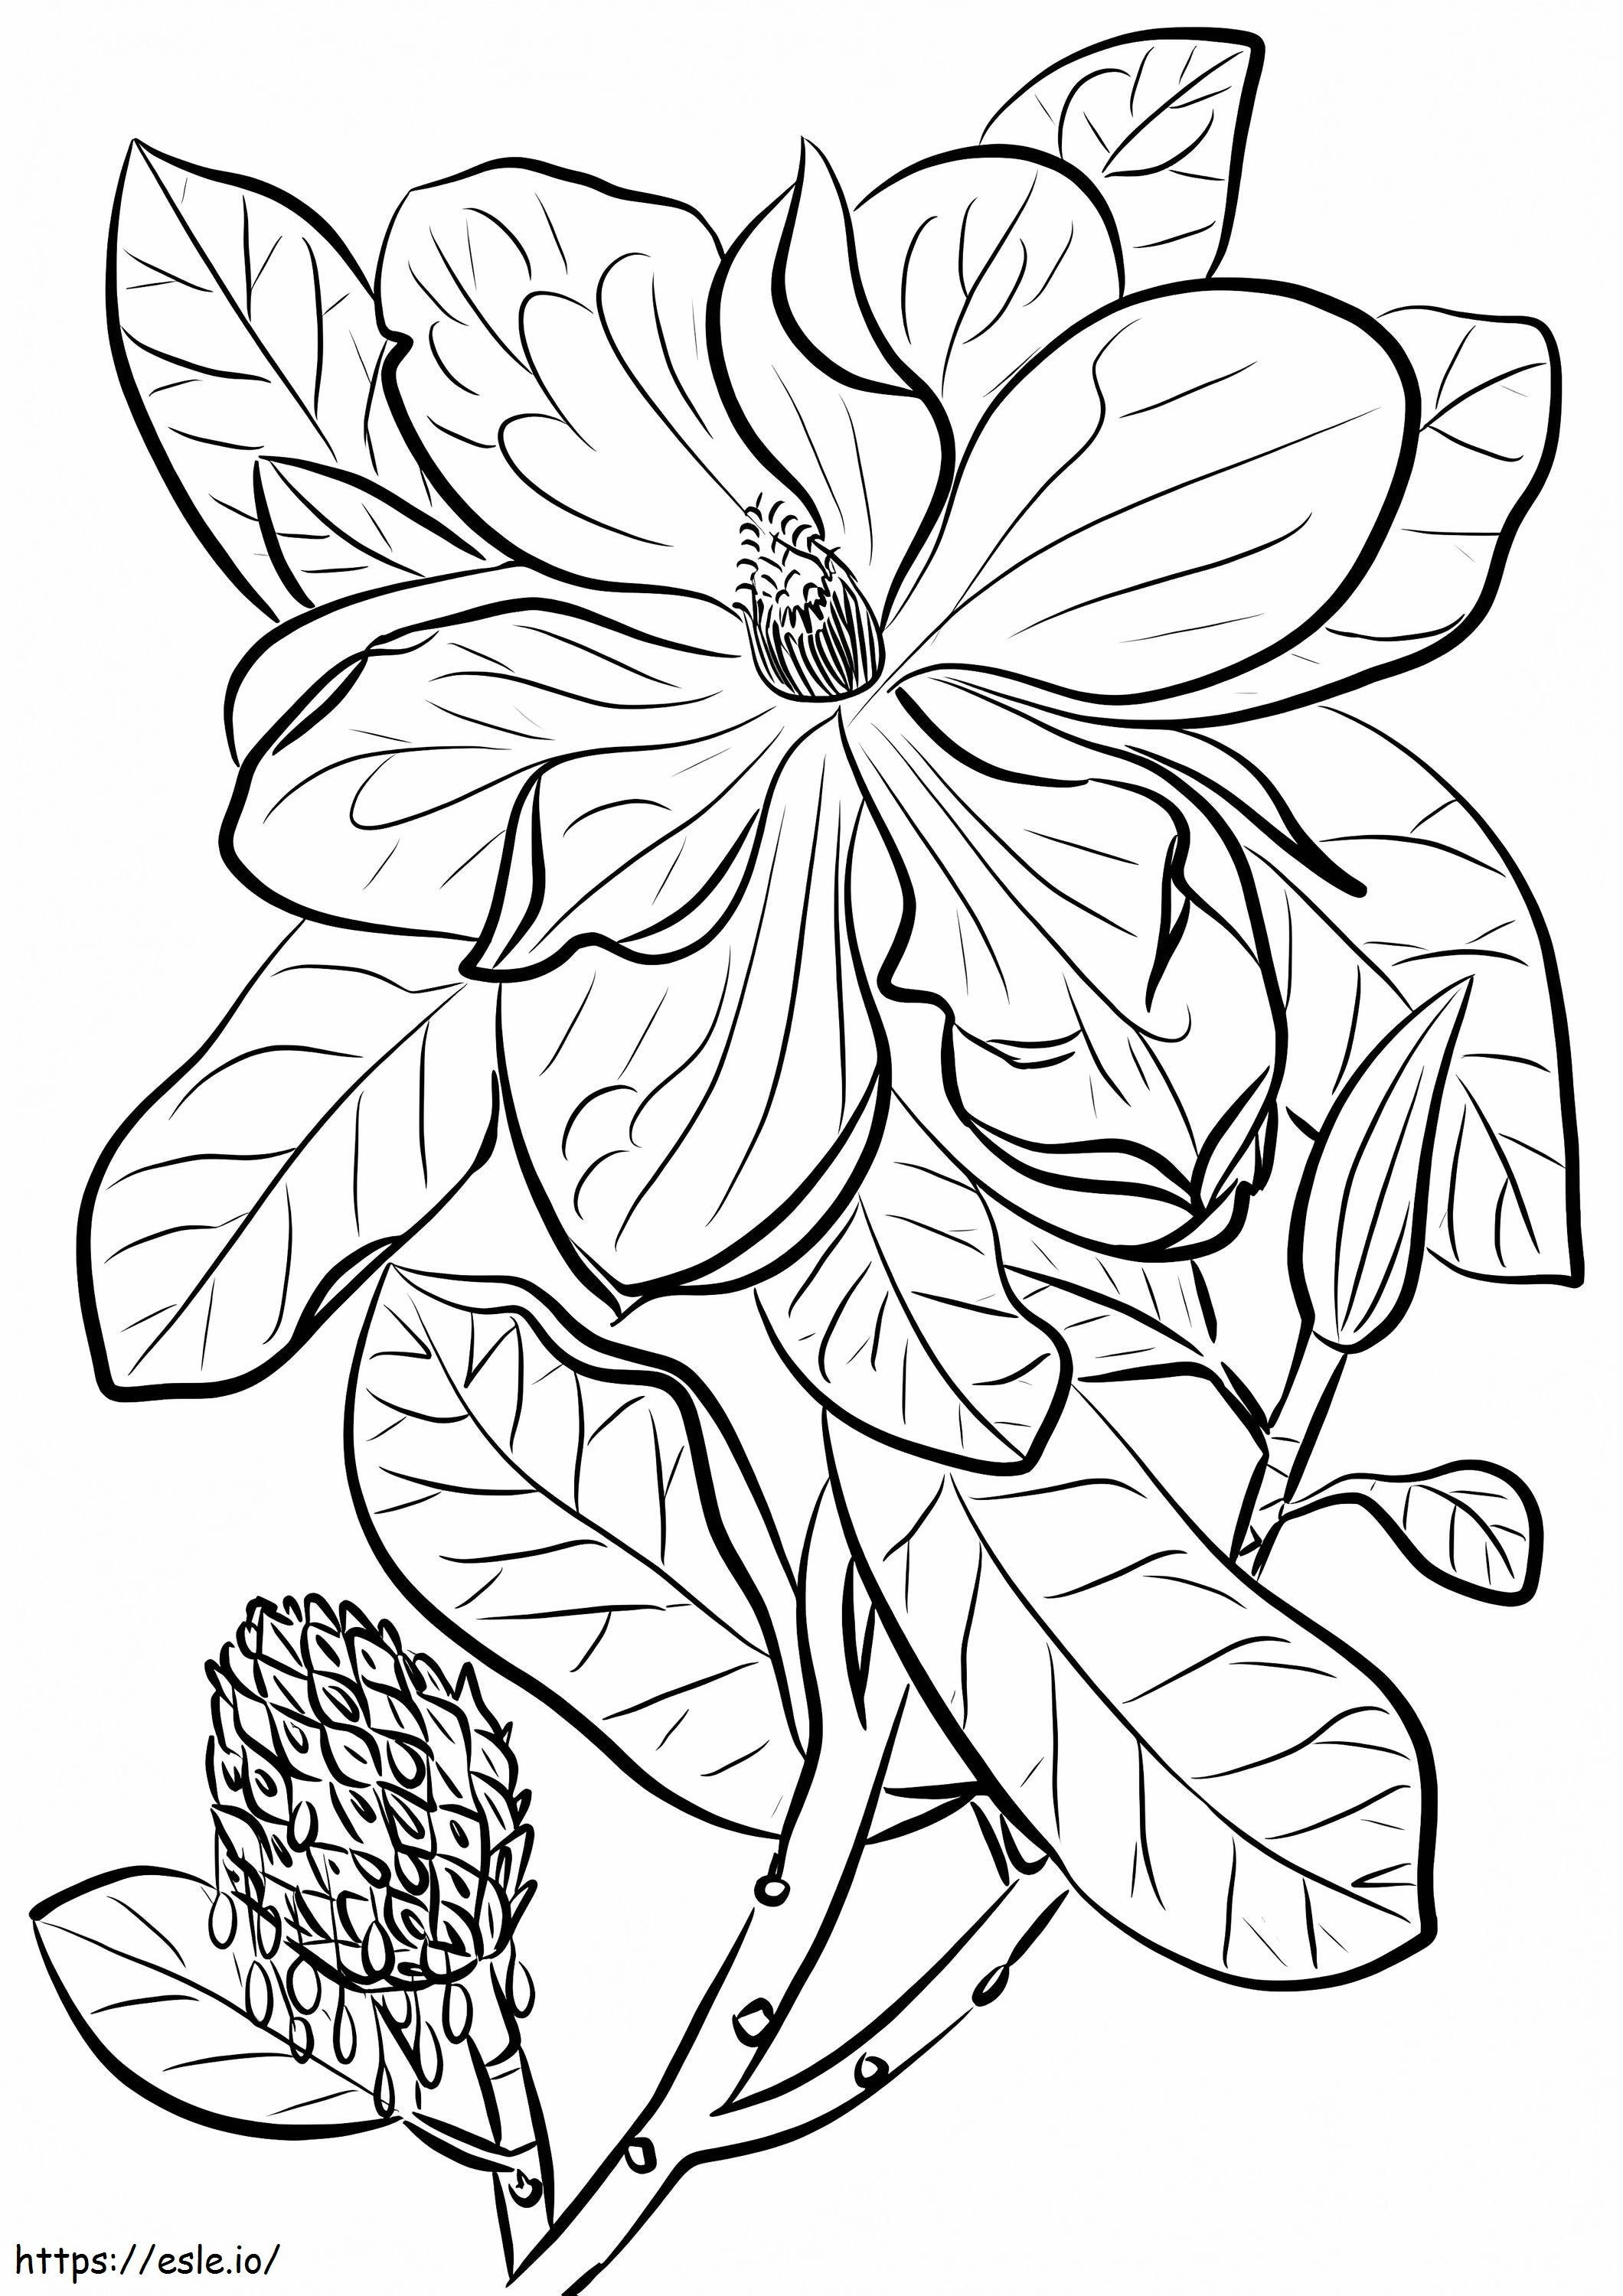 Large-Flowered Magnolia coloring page